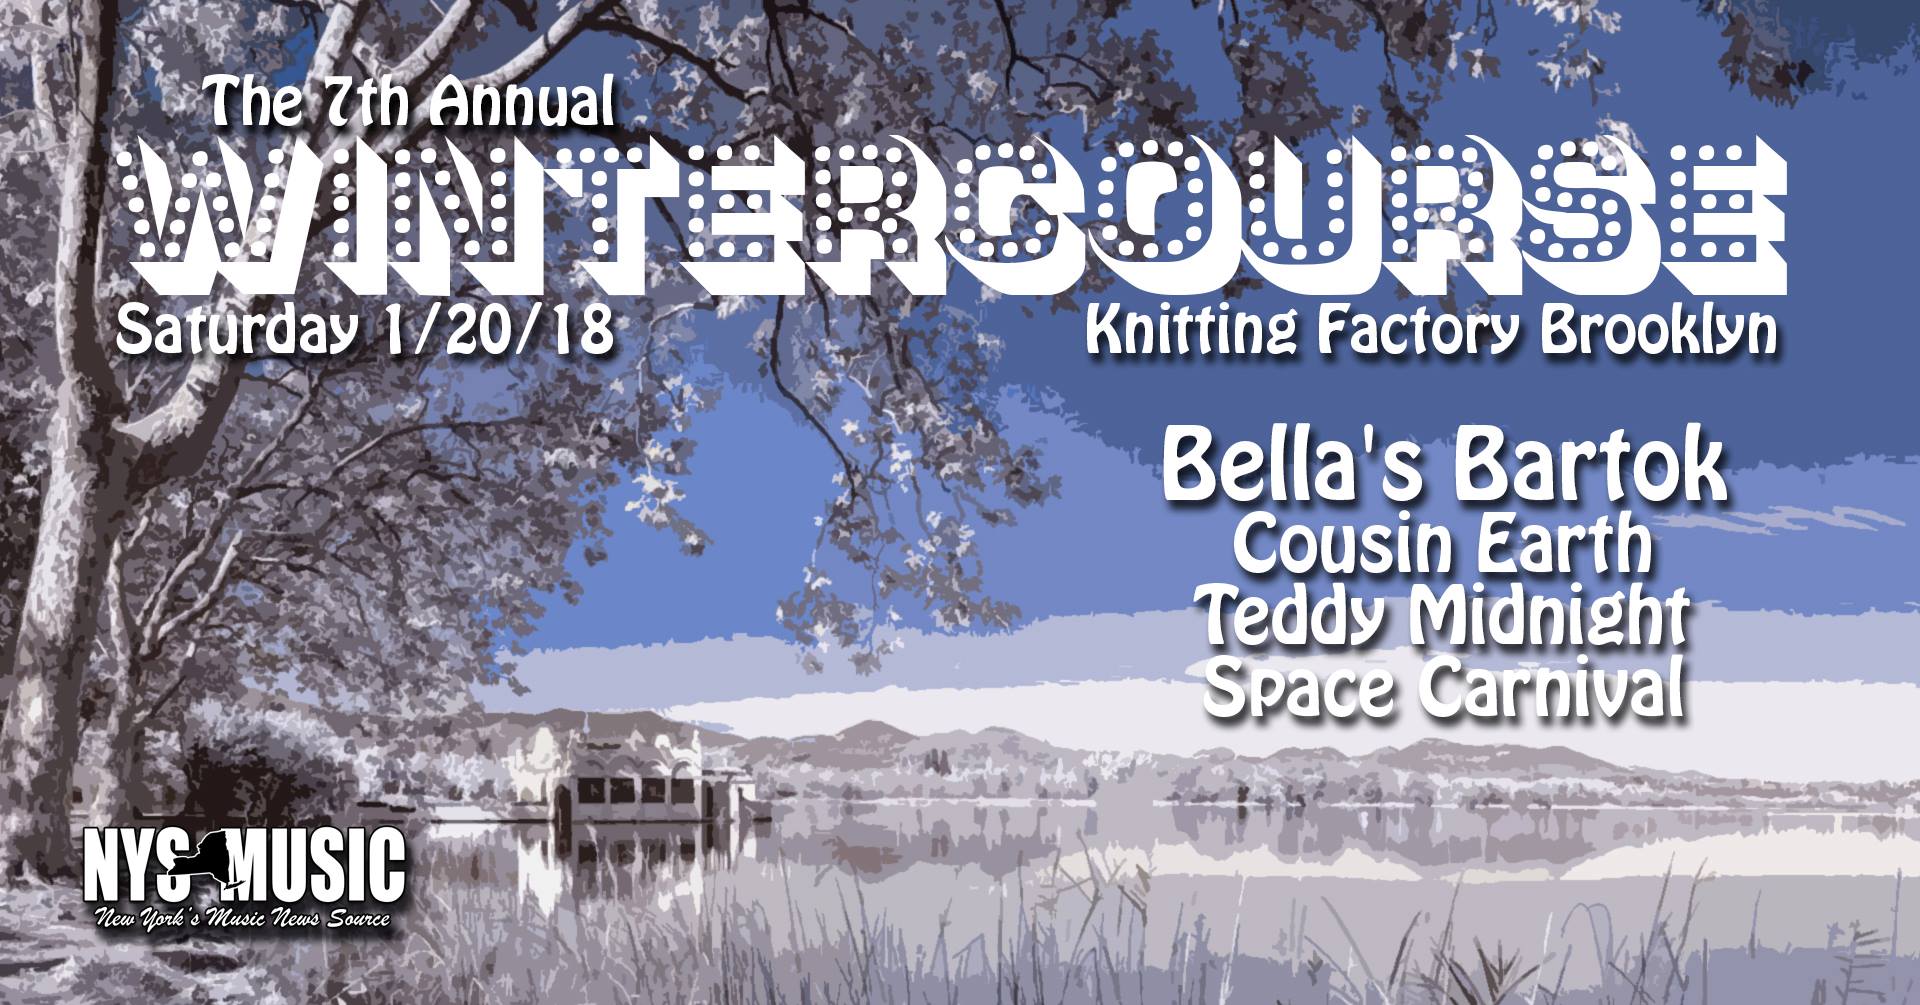 The Knitting Factory Heats Up in January with the 7th Annual Wintercourse